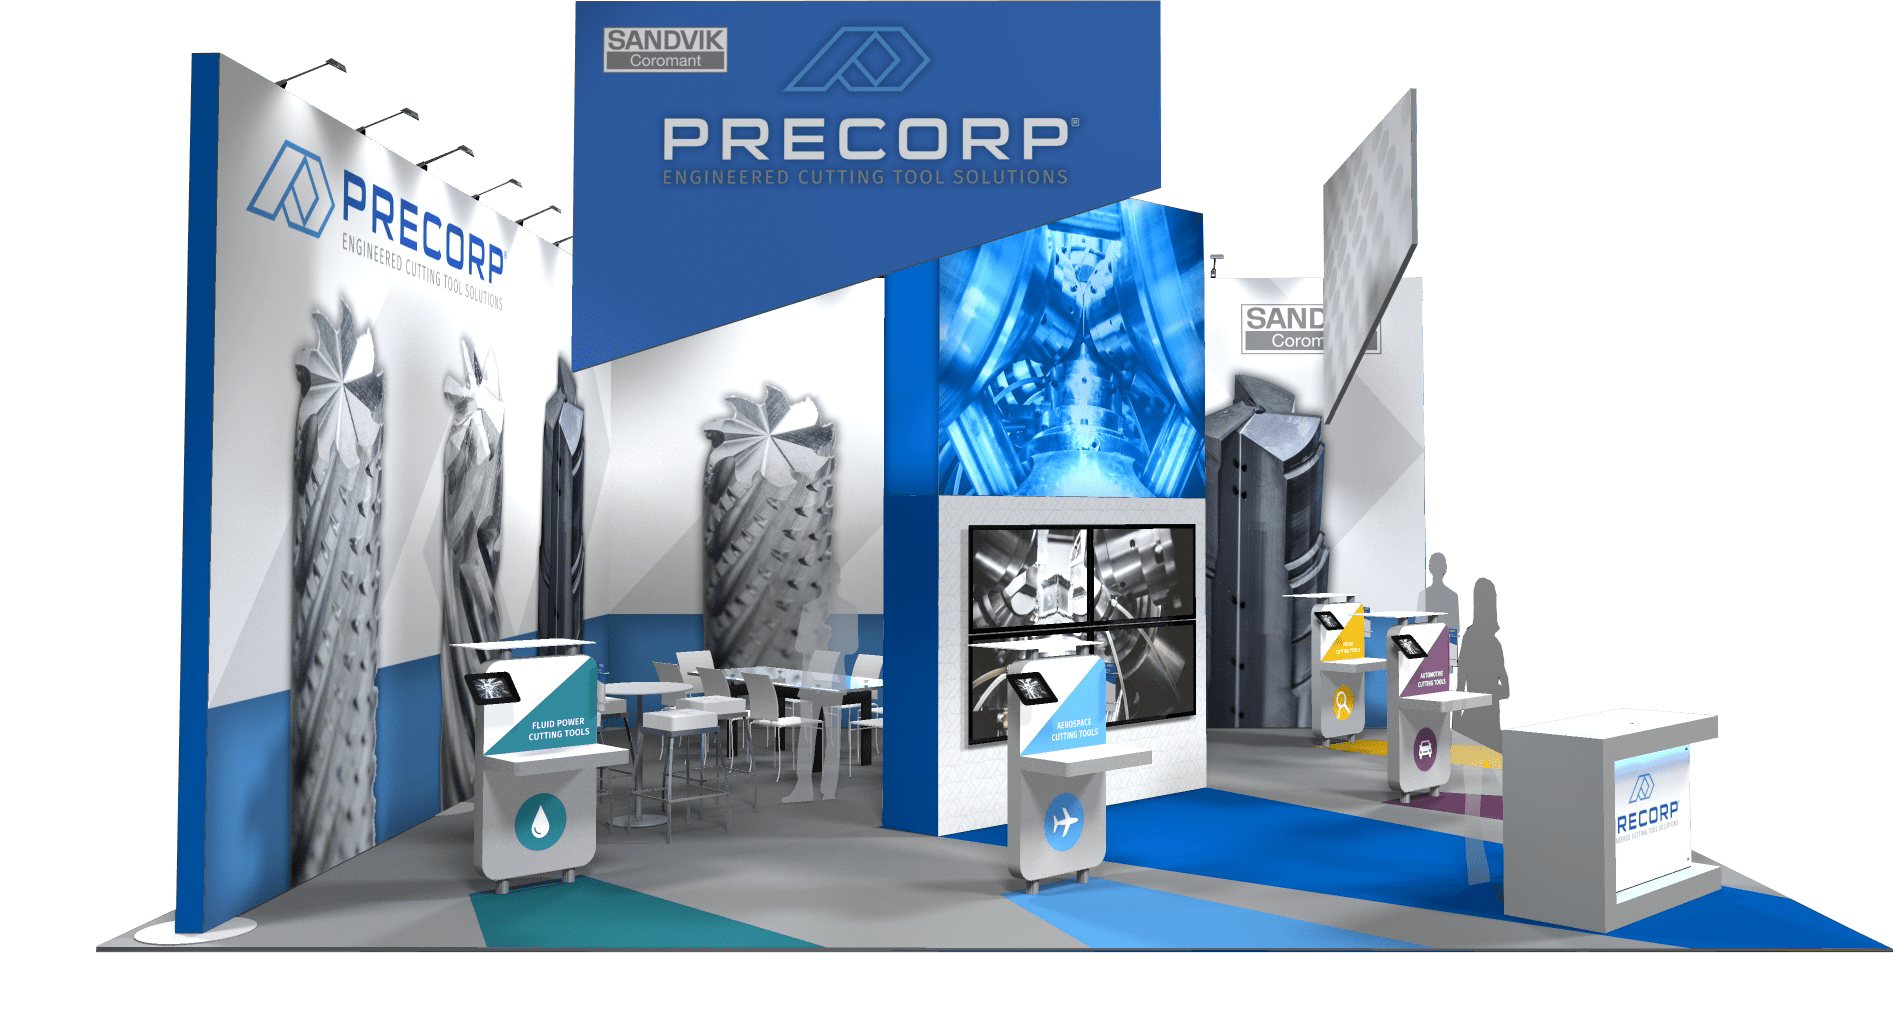 Skyline Trade Show Booth, Exhibits, Displays & Tradeshow Booth Design